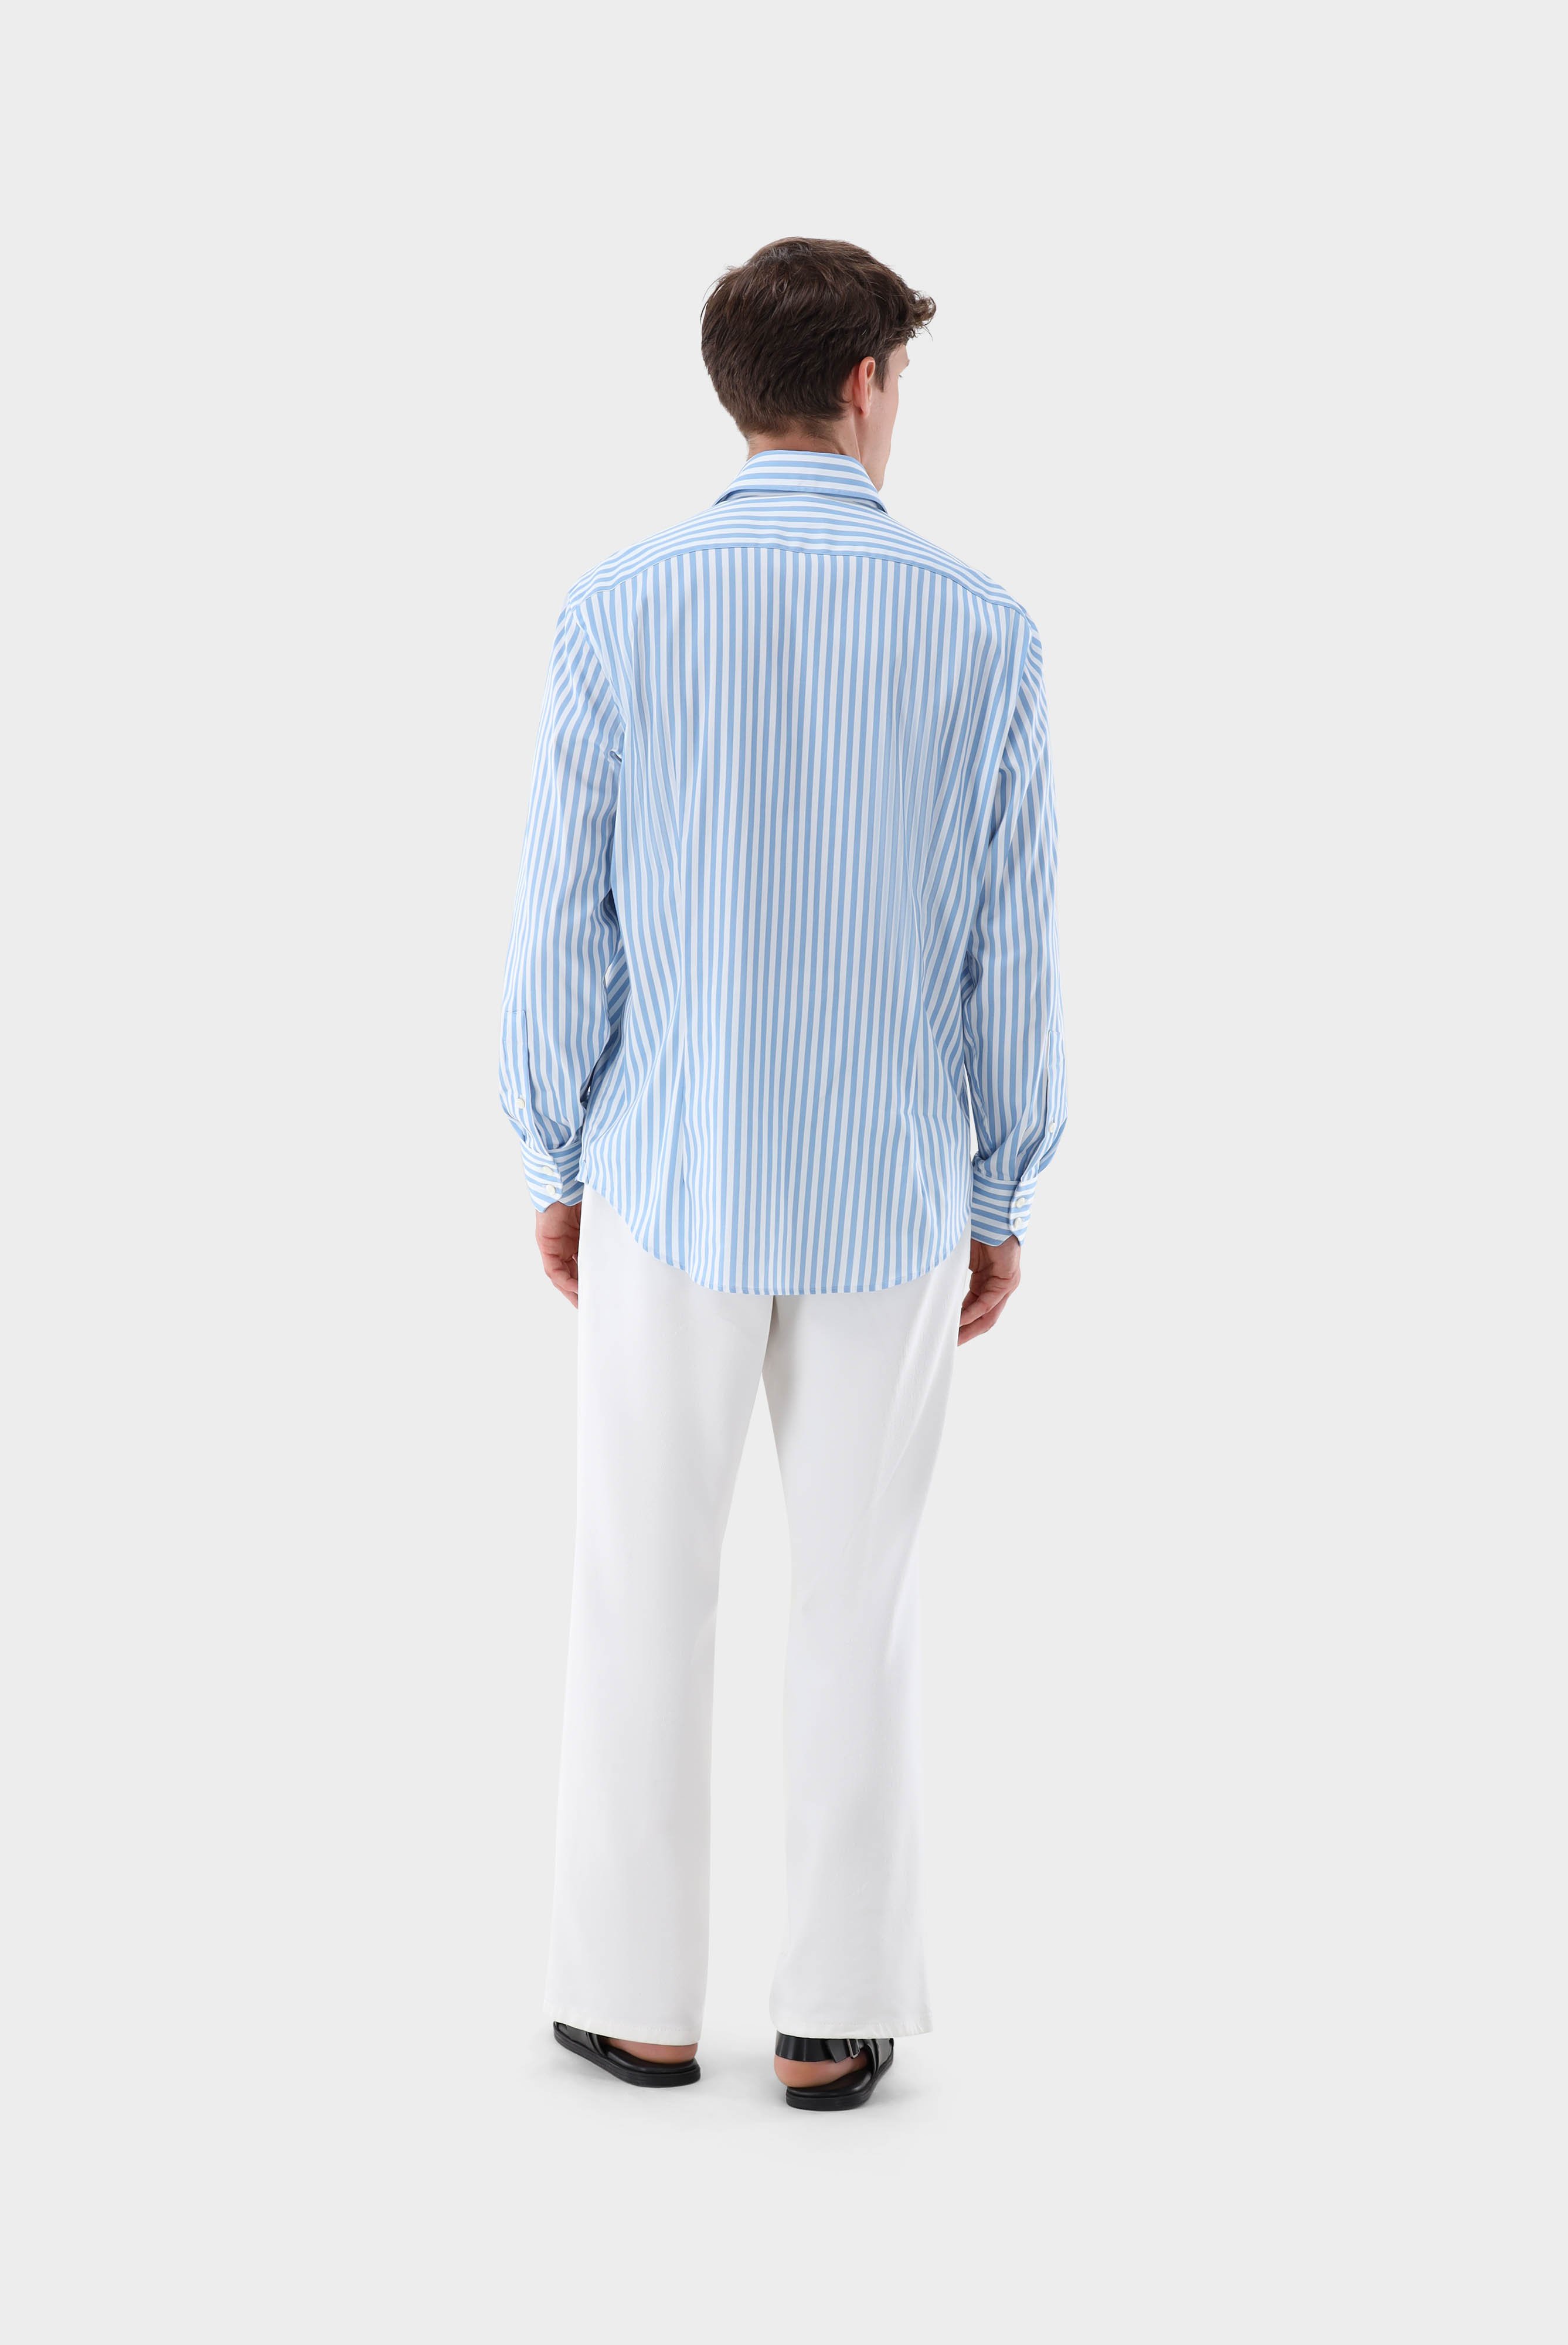 Casual Shirts+Striped Shirt in Cotton Stretch Tailor Fit+20.3283.NV.171959.720.38